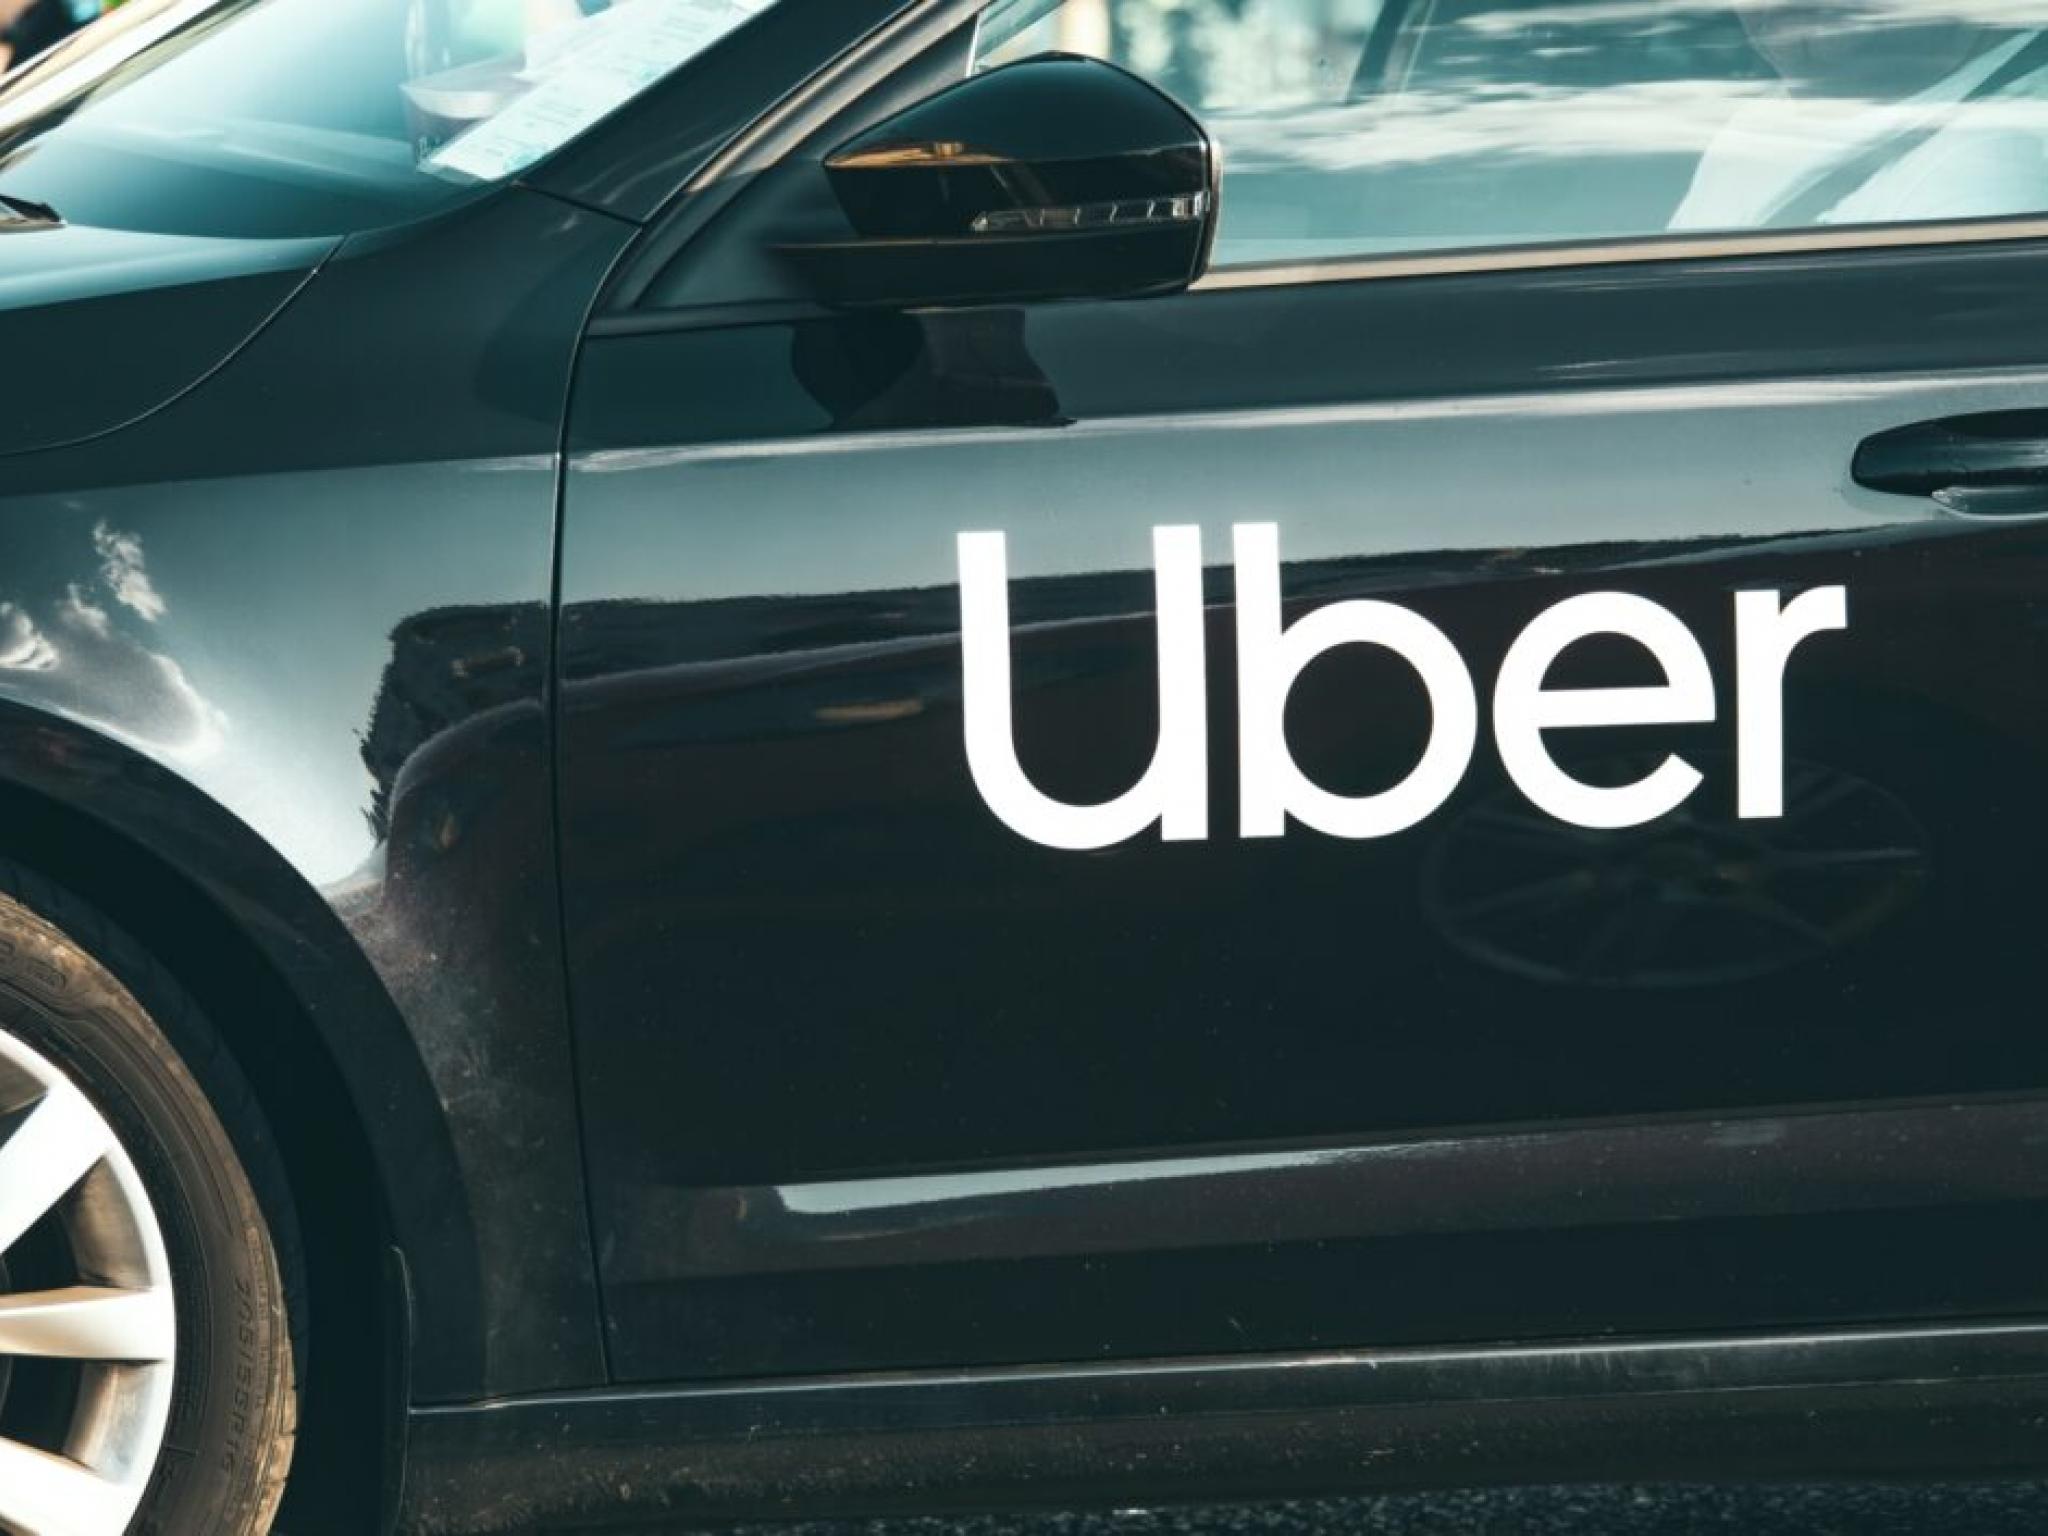  uber-prepares-for-paris-olympics-with-free-cruises-and-discounts 